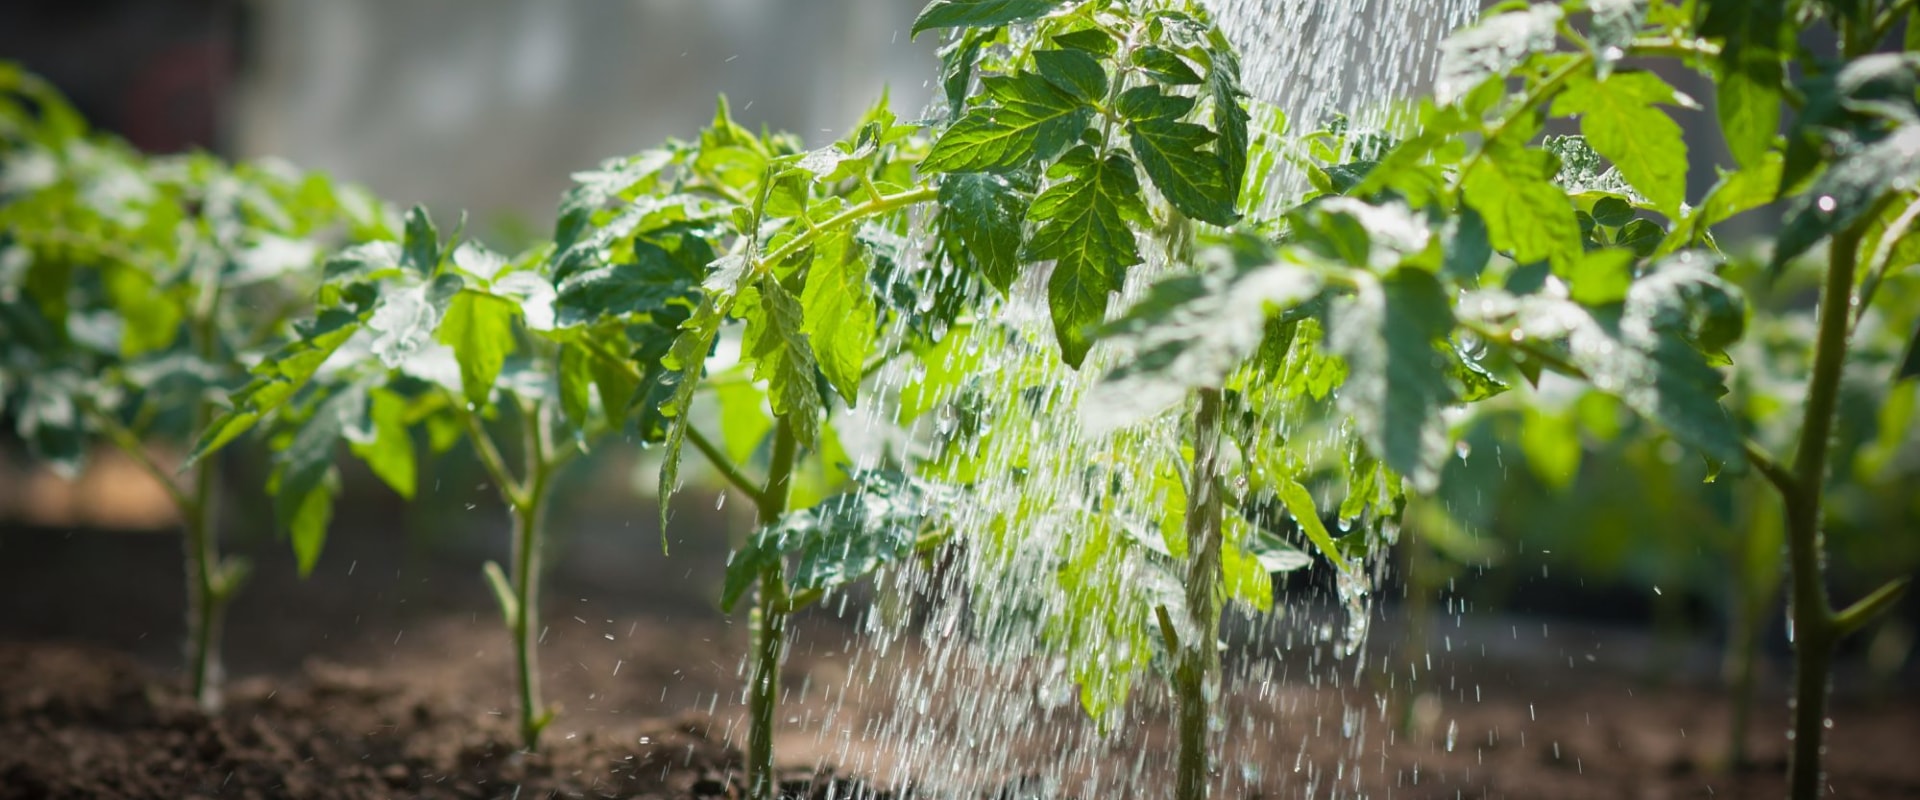 The Art of Mastering Watering Your Vegetable Garden: 9 Tips and Techniques